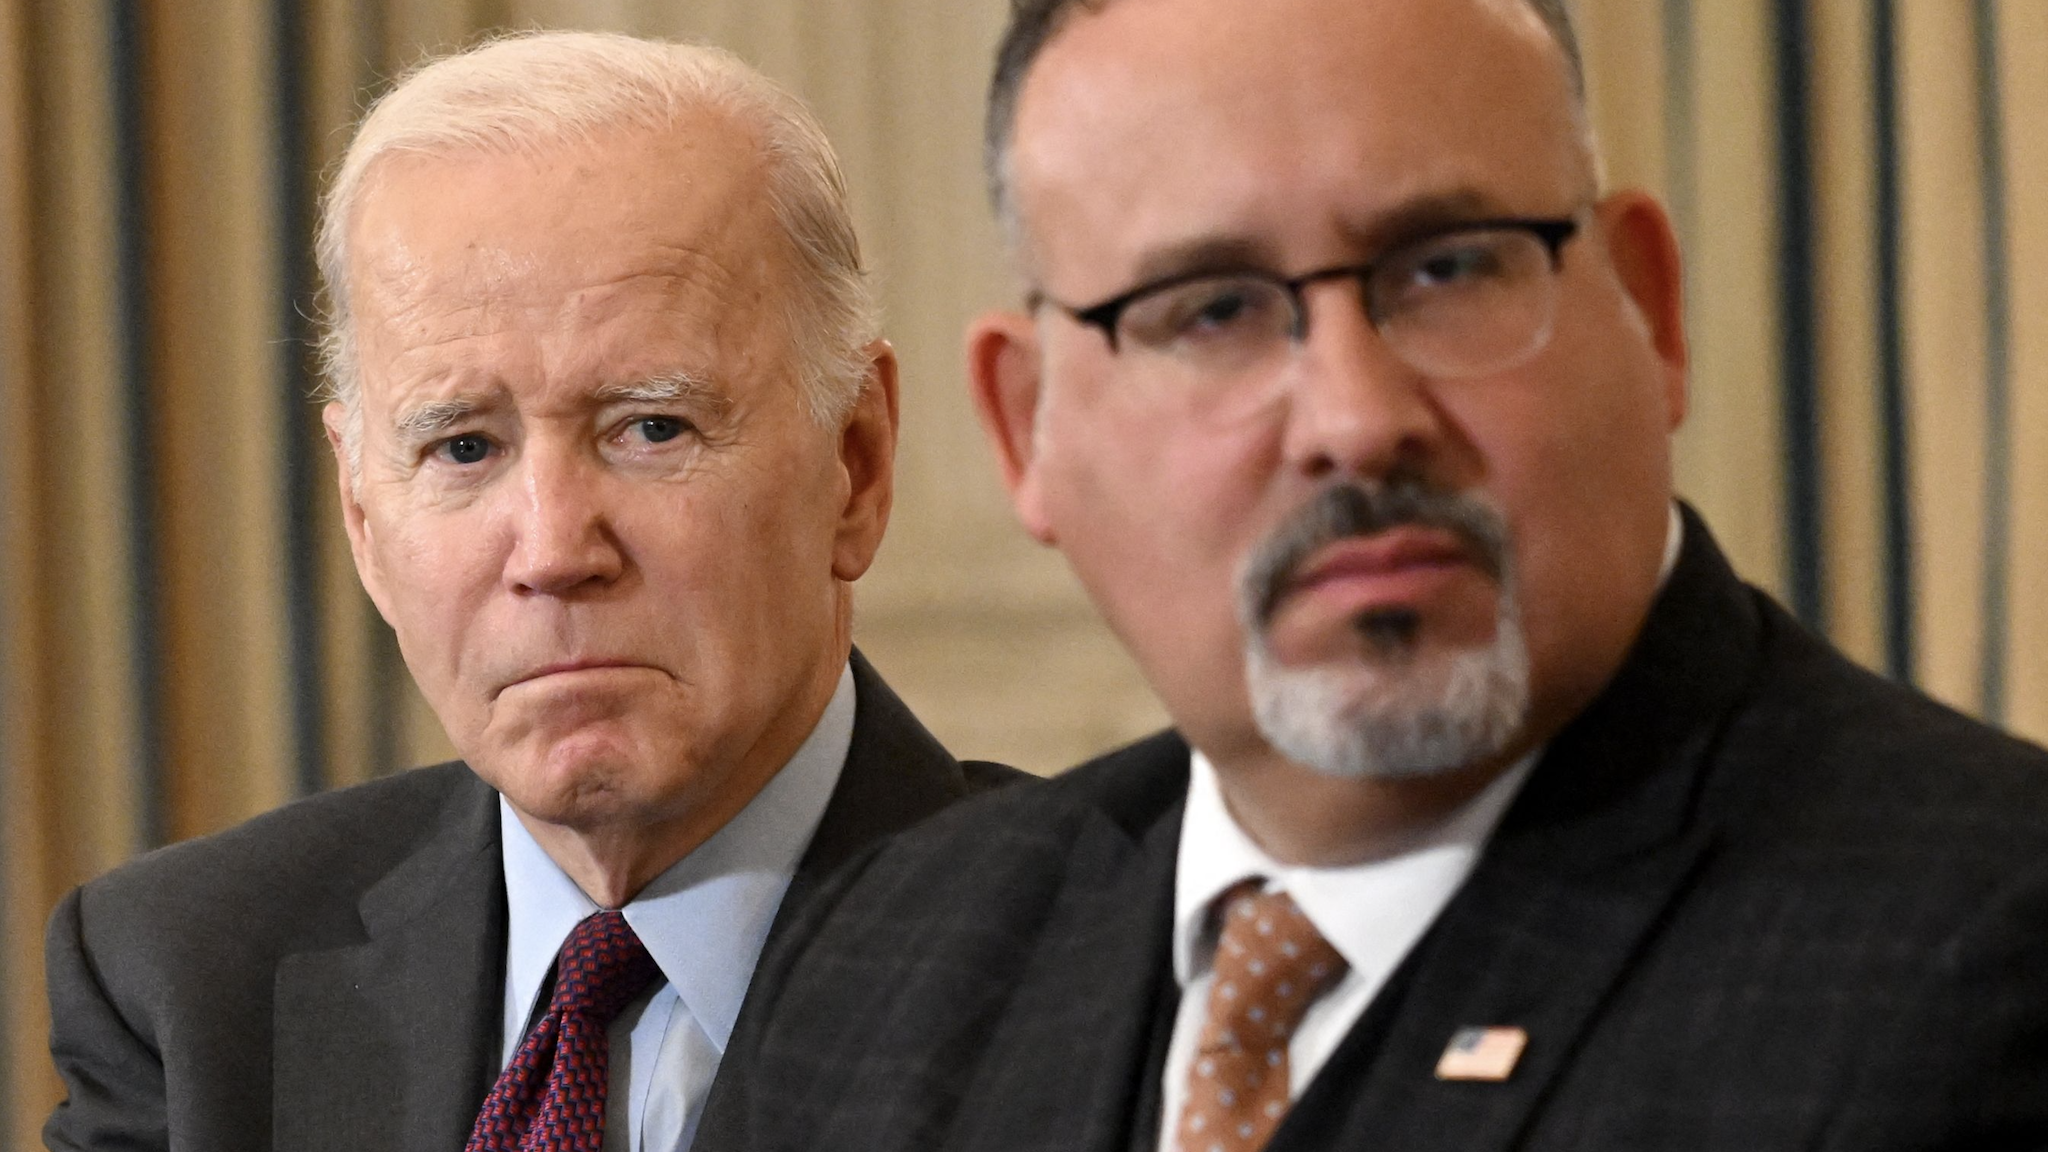 US President Joe Biden, and US Education Secretary Miguel Cardona attend the second meeting of the Task Force on Reproductive Healthcare Access in the State Dining Room of the White House in Washington, DC, on October 4, 2022.